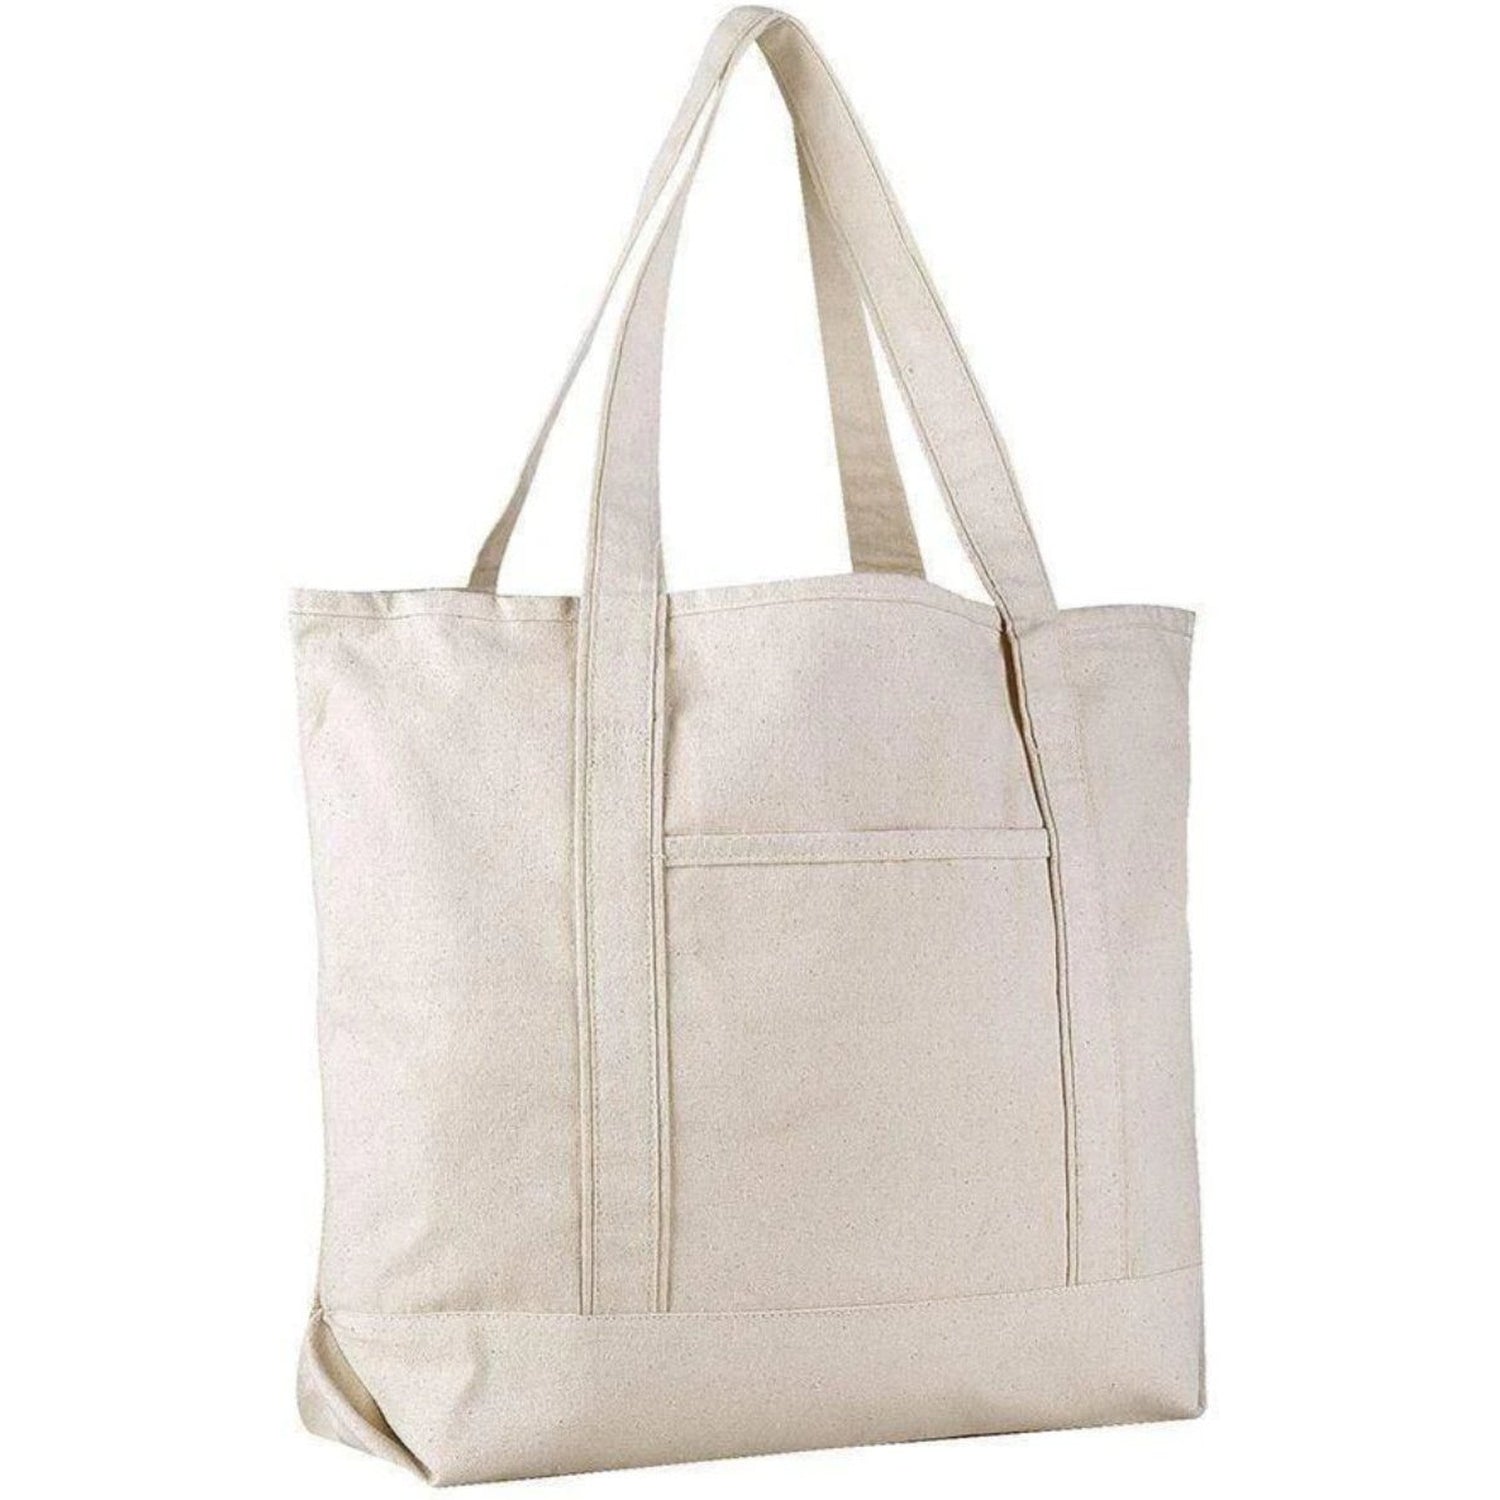 Extra Large Canvas Tote Bags Wholesale - Bulk Canvas Boat Tote Bags – BagzDepot™